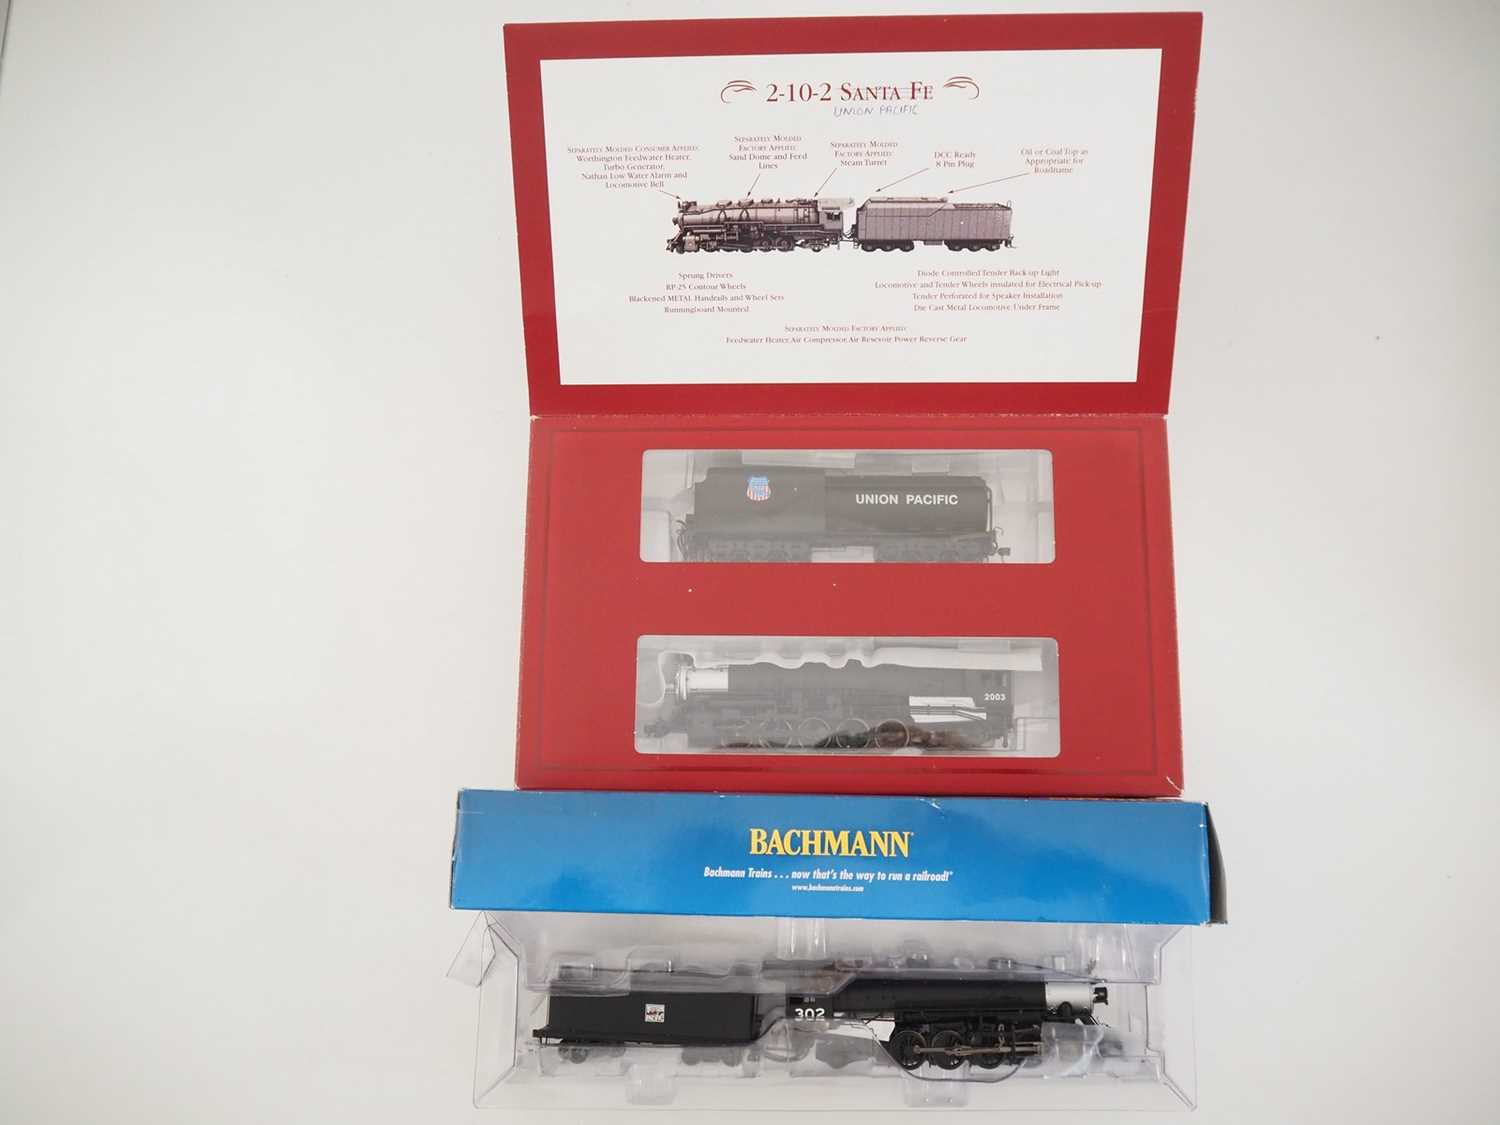 A pair of HO gauge American outline steam locomotives by IHC and BACHMANN in Union Pacific and